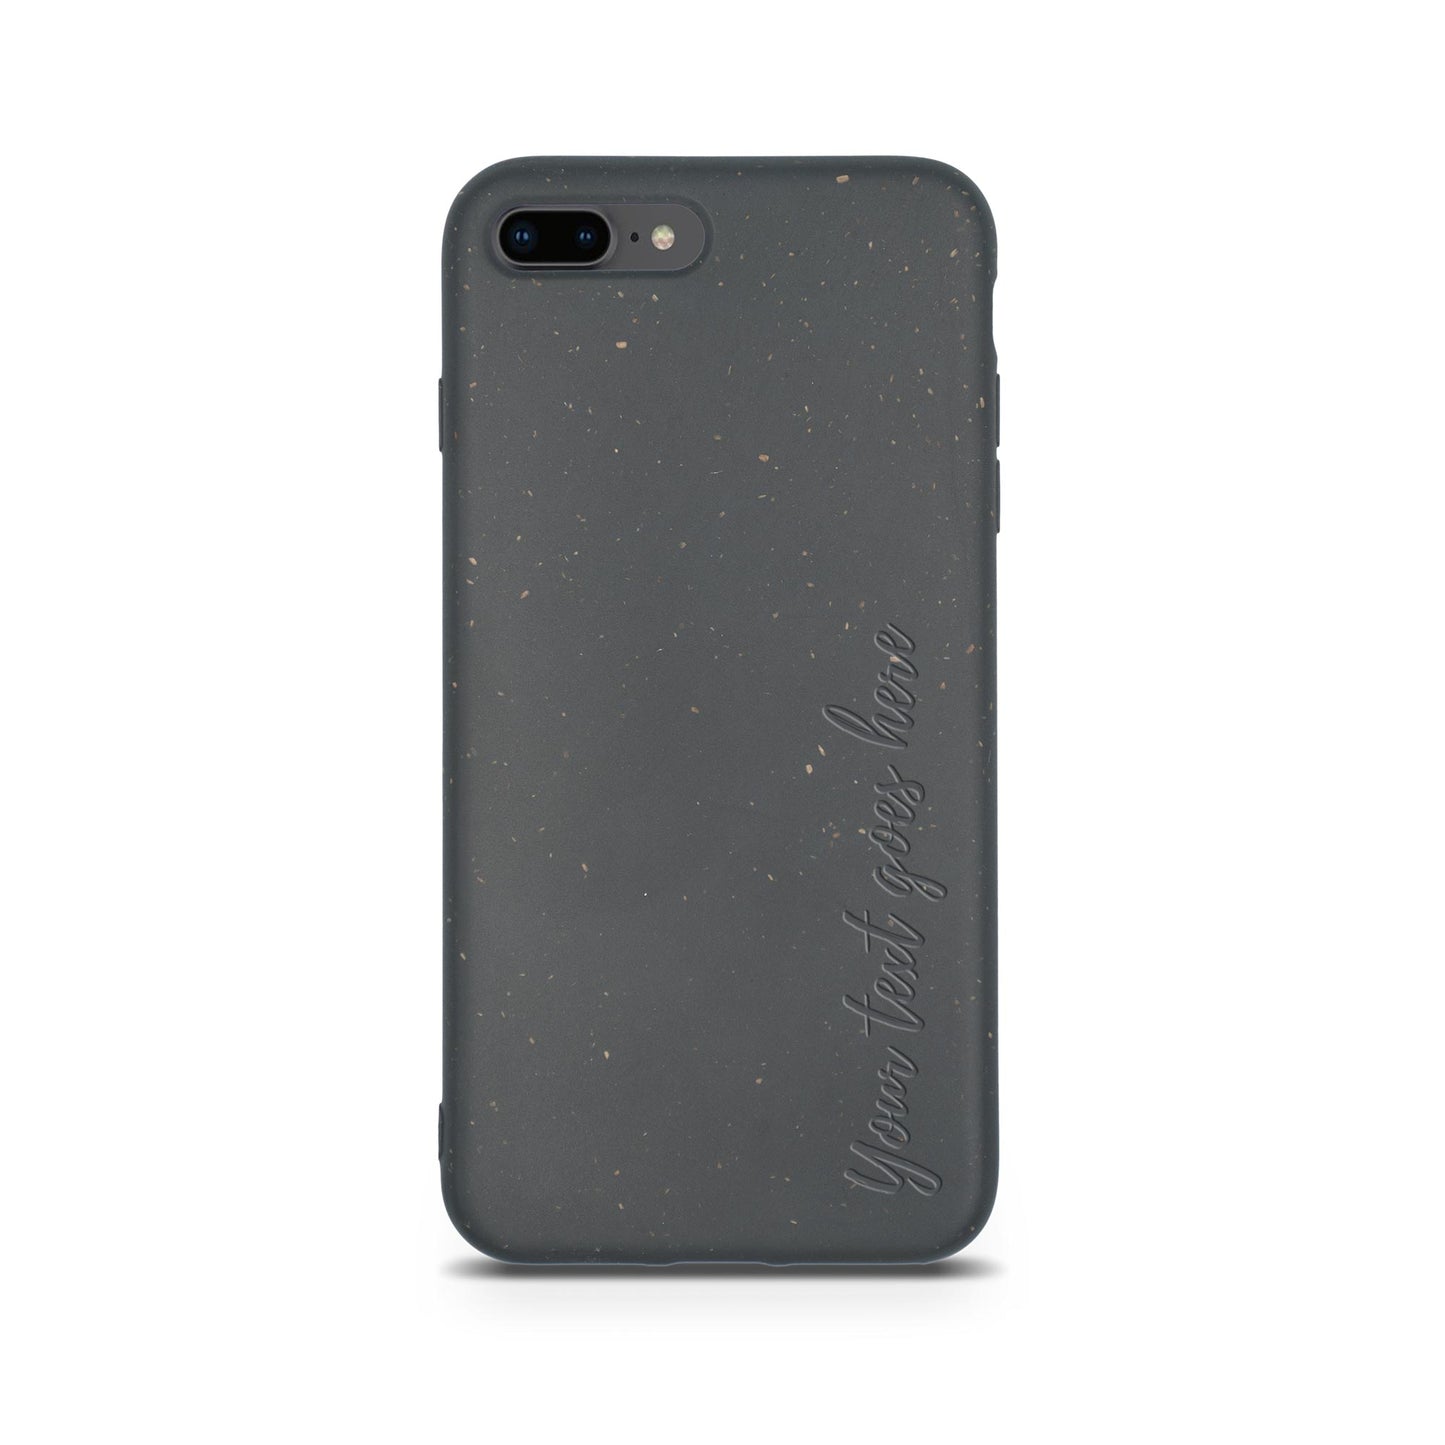 A gray speckled eco-friendly Tan Lily Biodegradable Personalized iPhone Case - Black for an iPhone with the phrase "Your text here" embossed in cursive on the side.